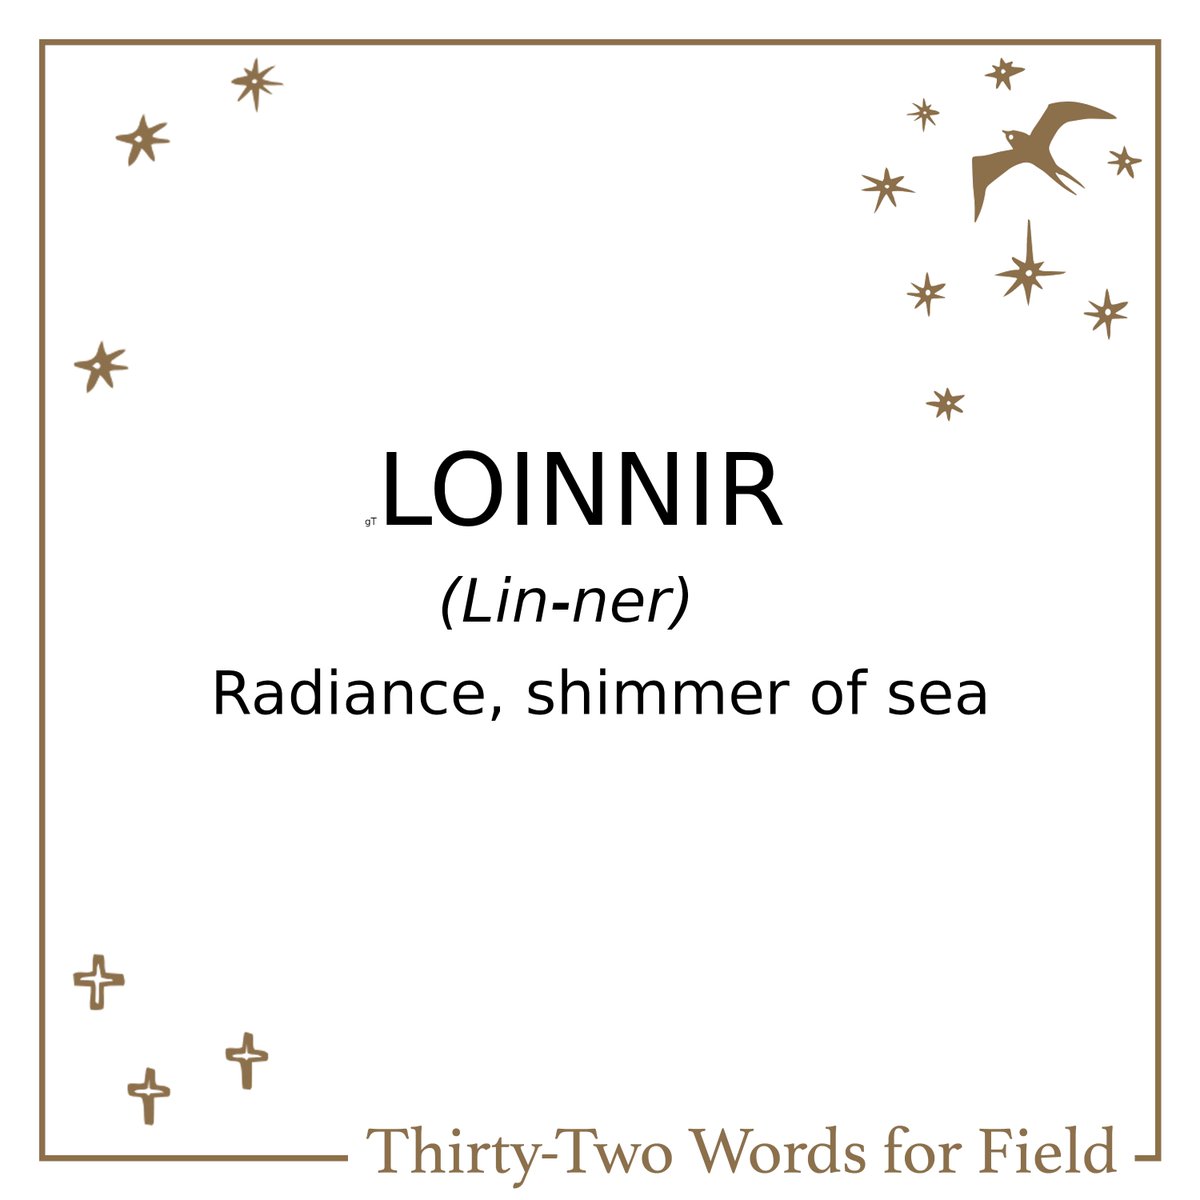 Loinnir: Radiance, shimmer of sea Image by: Jackie Nevin